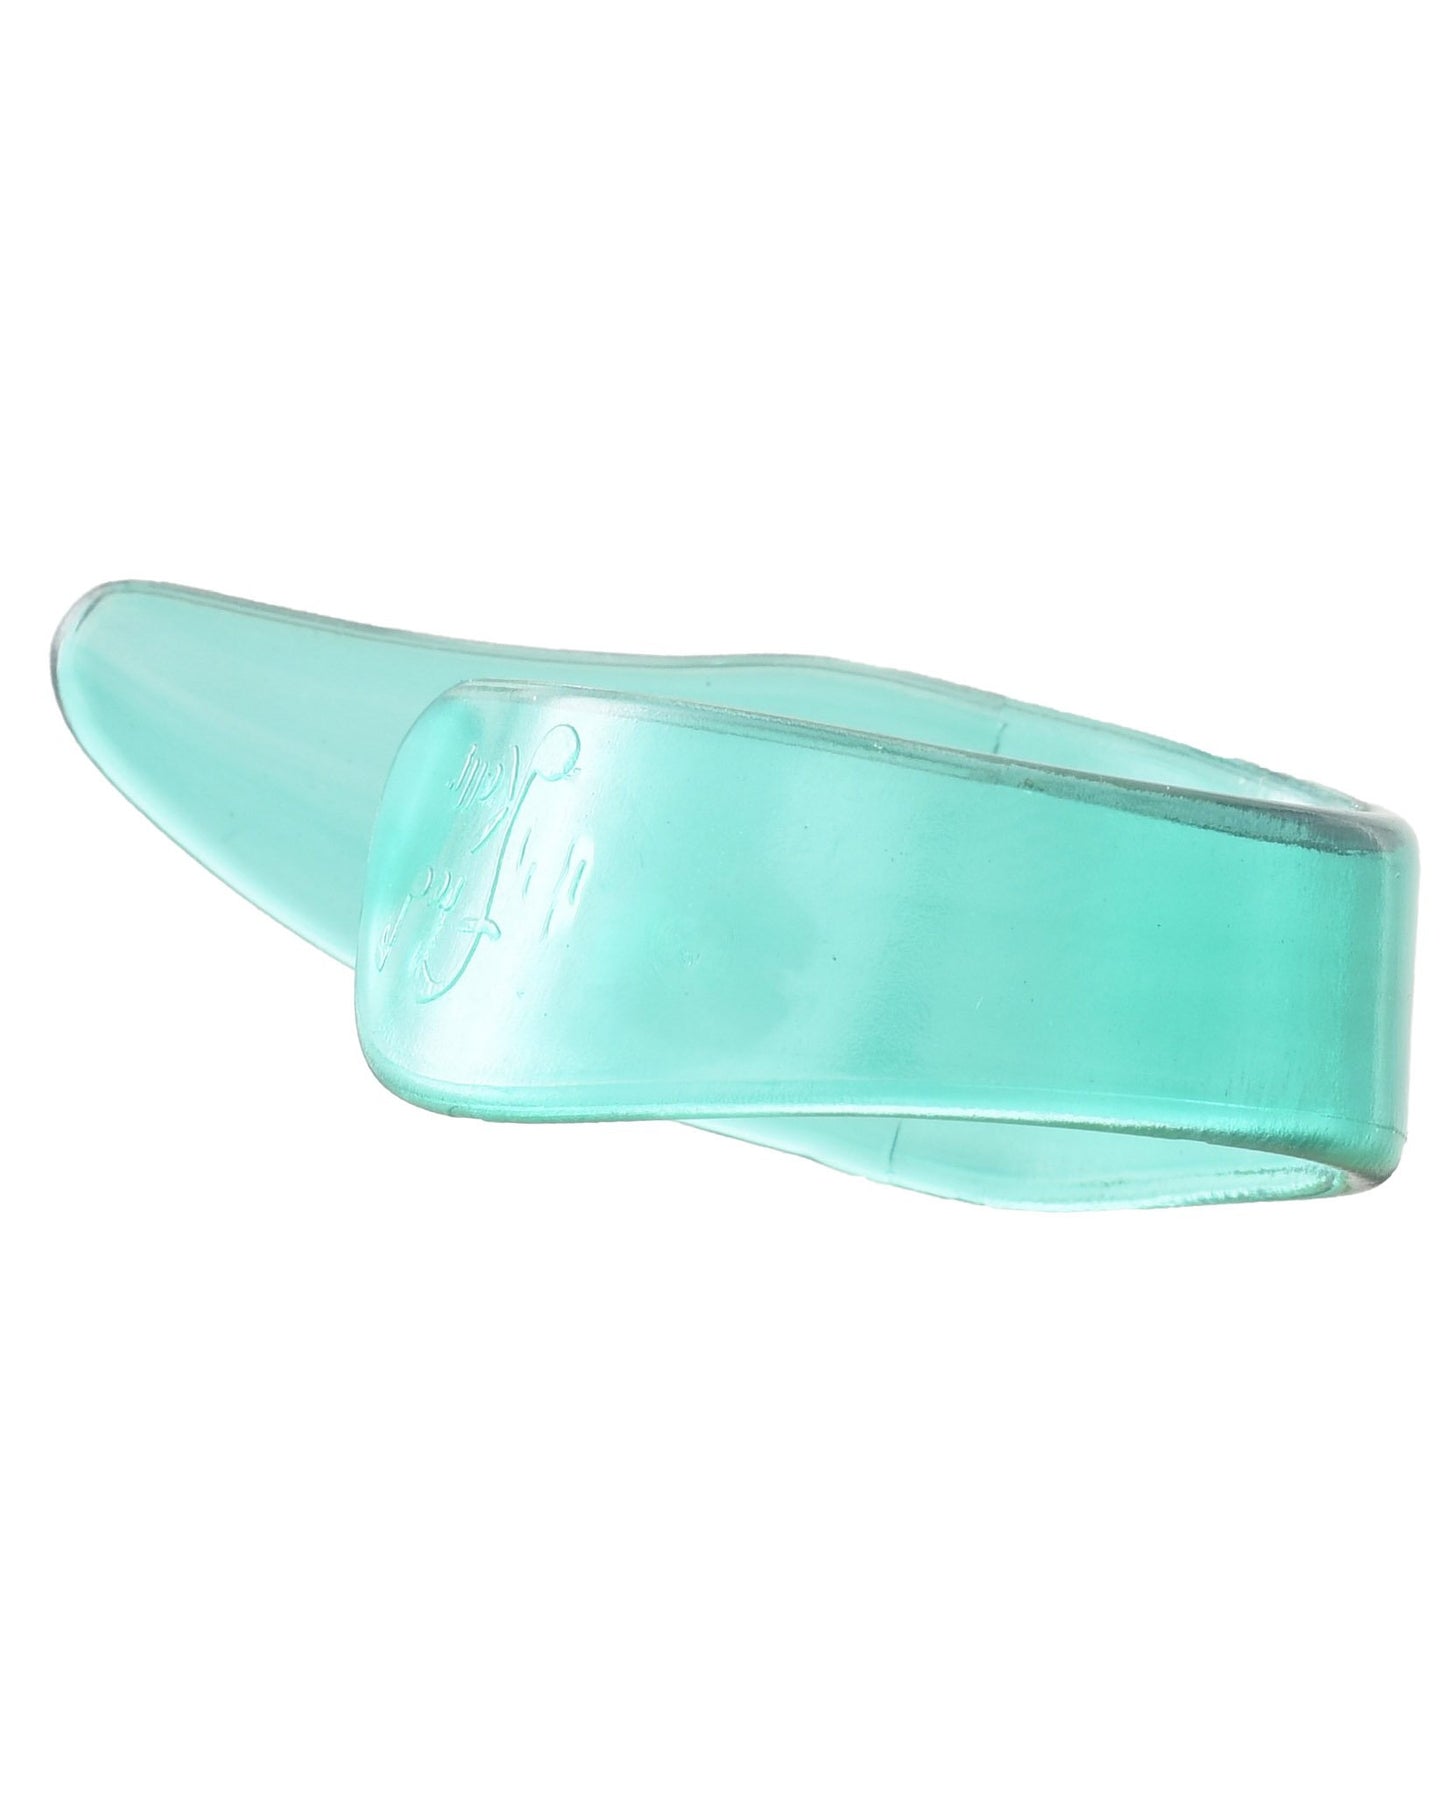 Image 1 of Fred Kelly Regular Style Large Size Polycarbonate Thumbpick - SKU# PK23LG-POLY : Product Type Accessories & Parts : Elderly Instruments